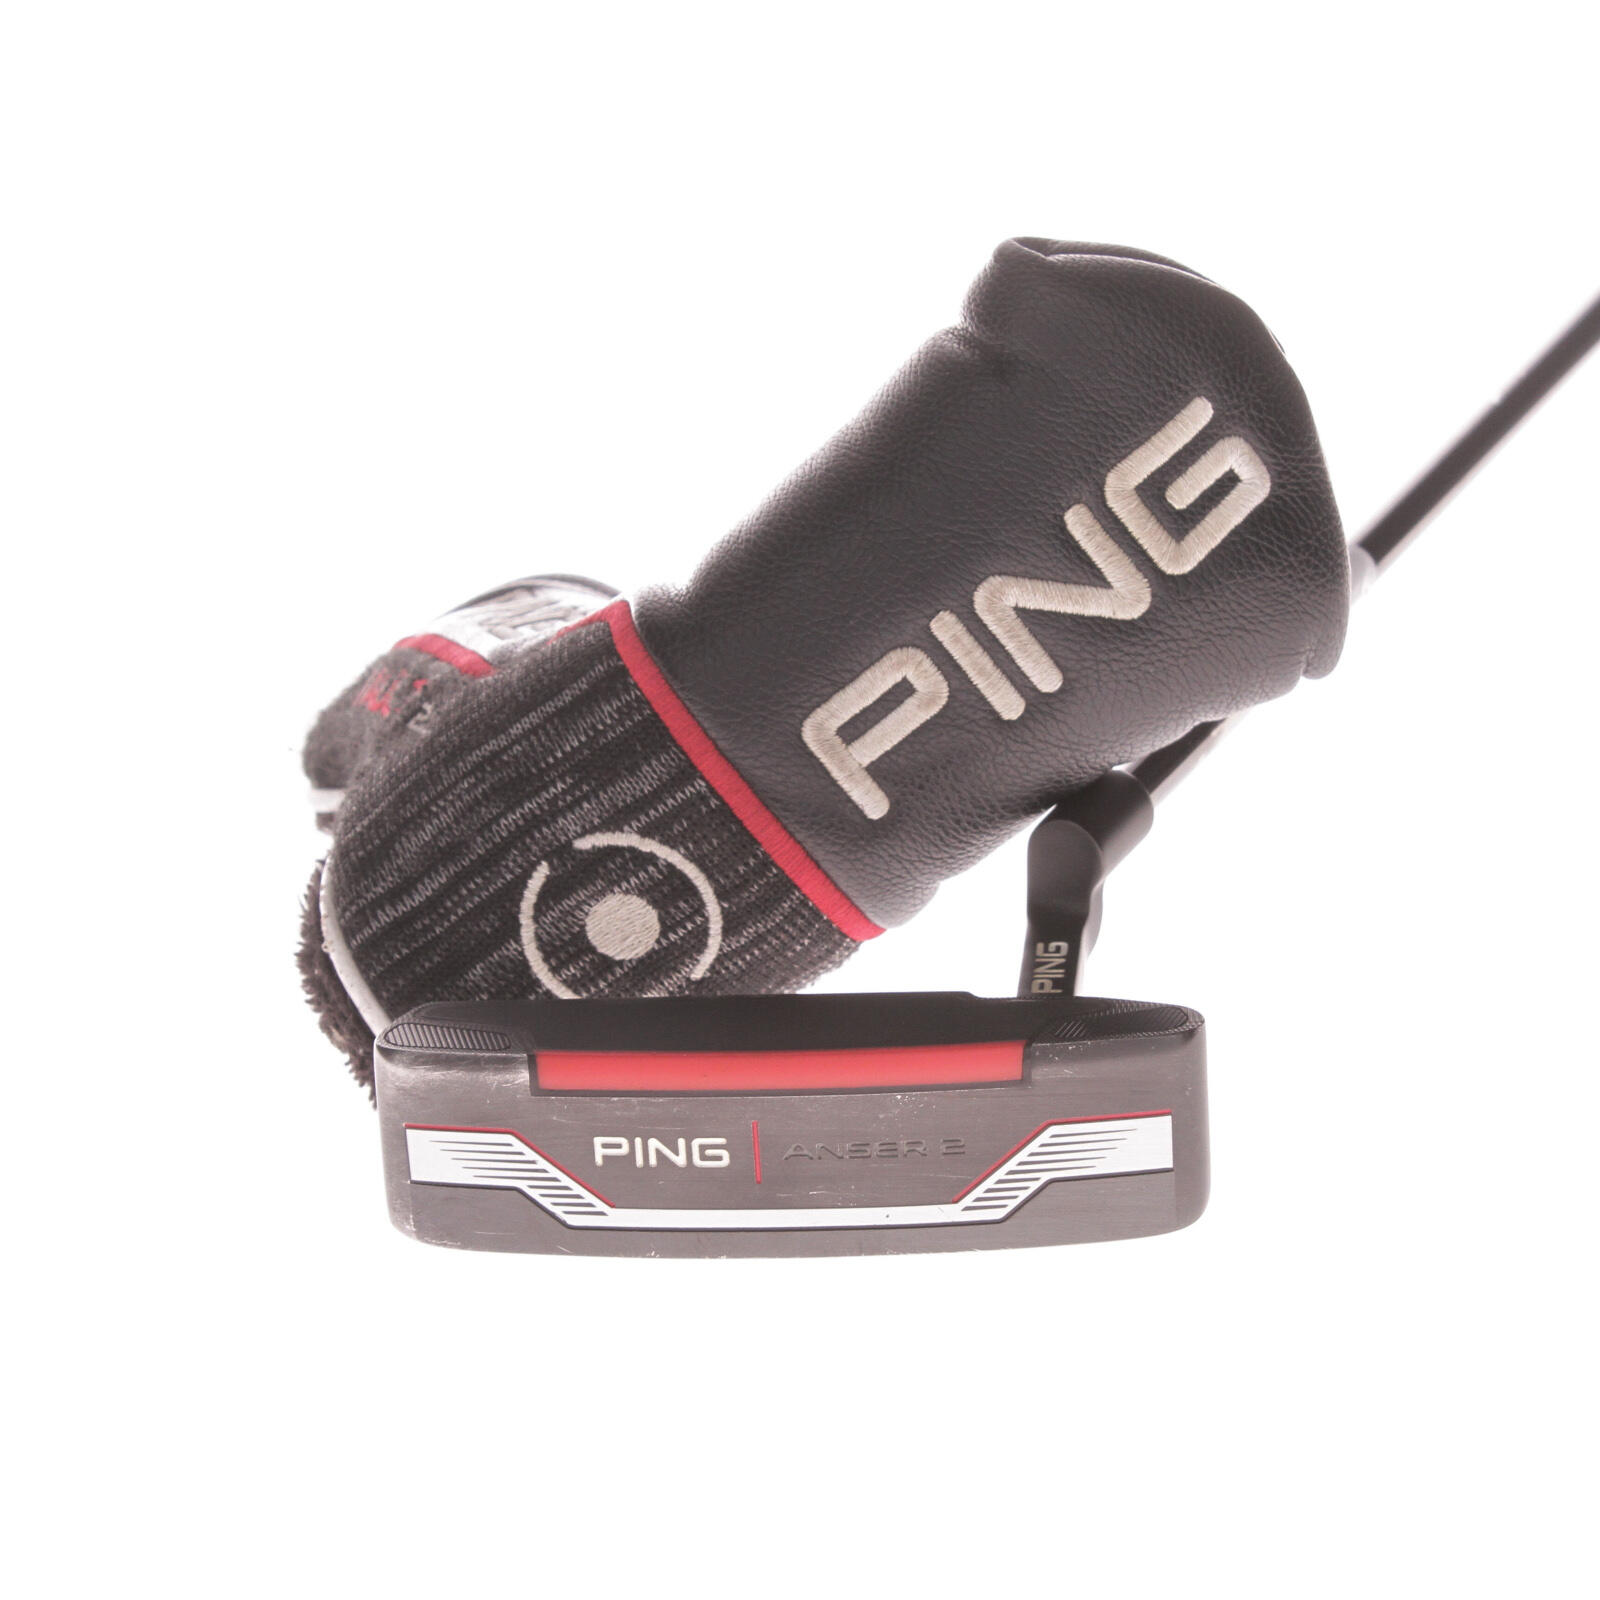 PING USED - Ping Anser 2 Putter 33 Inches Length Steel Shaft Right Handed - GRADE B